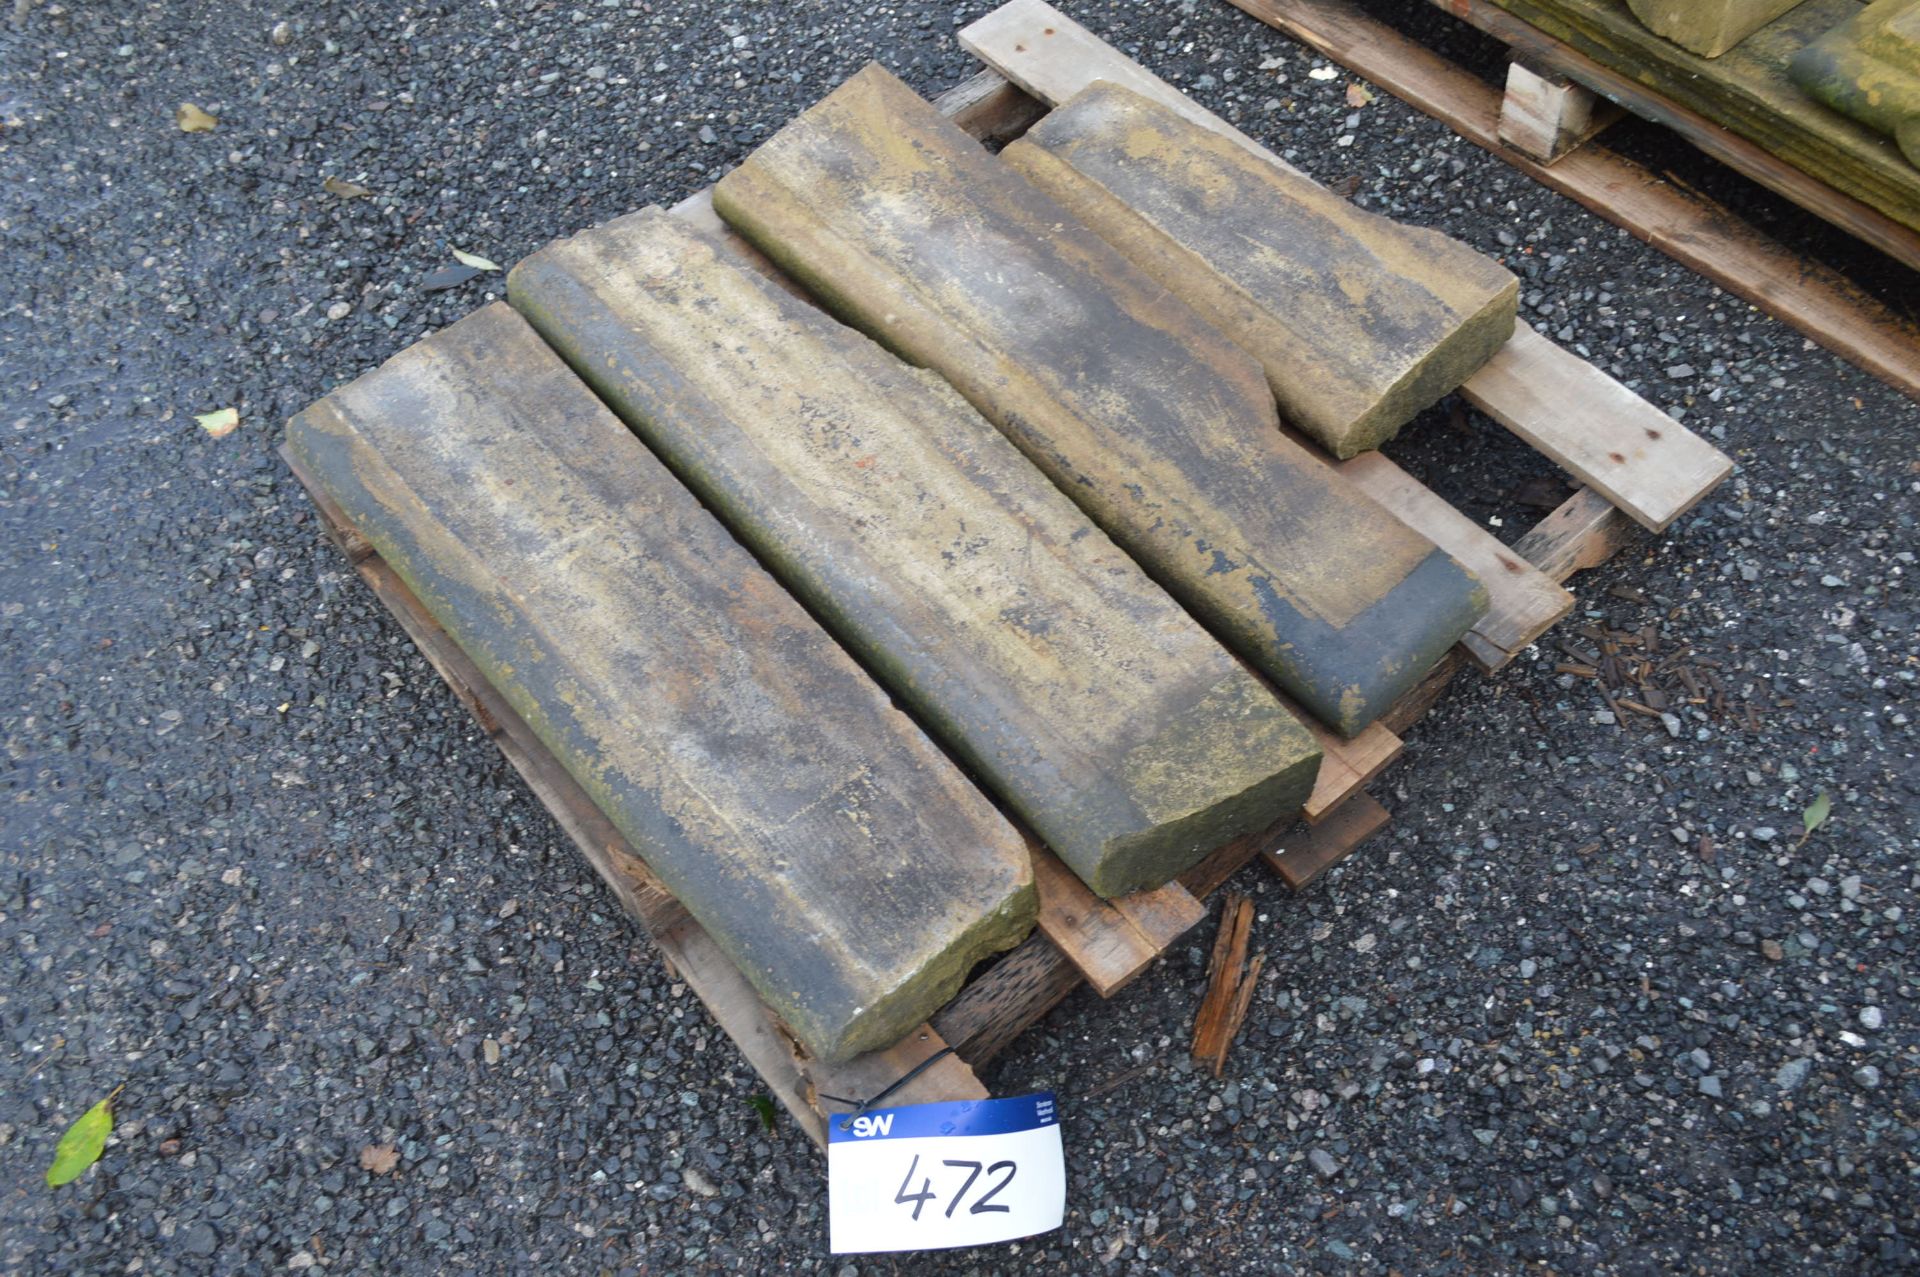 Four Stone Lengths, up to approx. 850mm long, as set out on one pallet